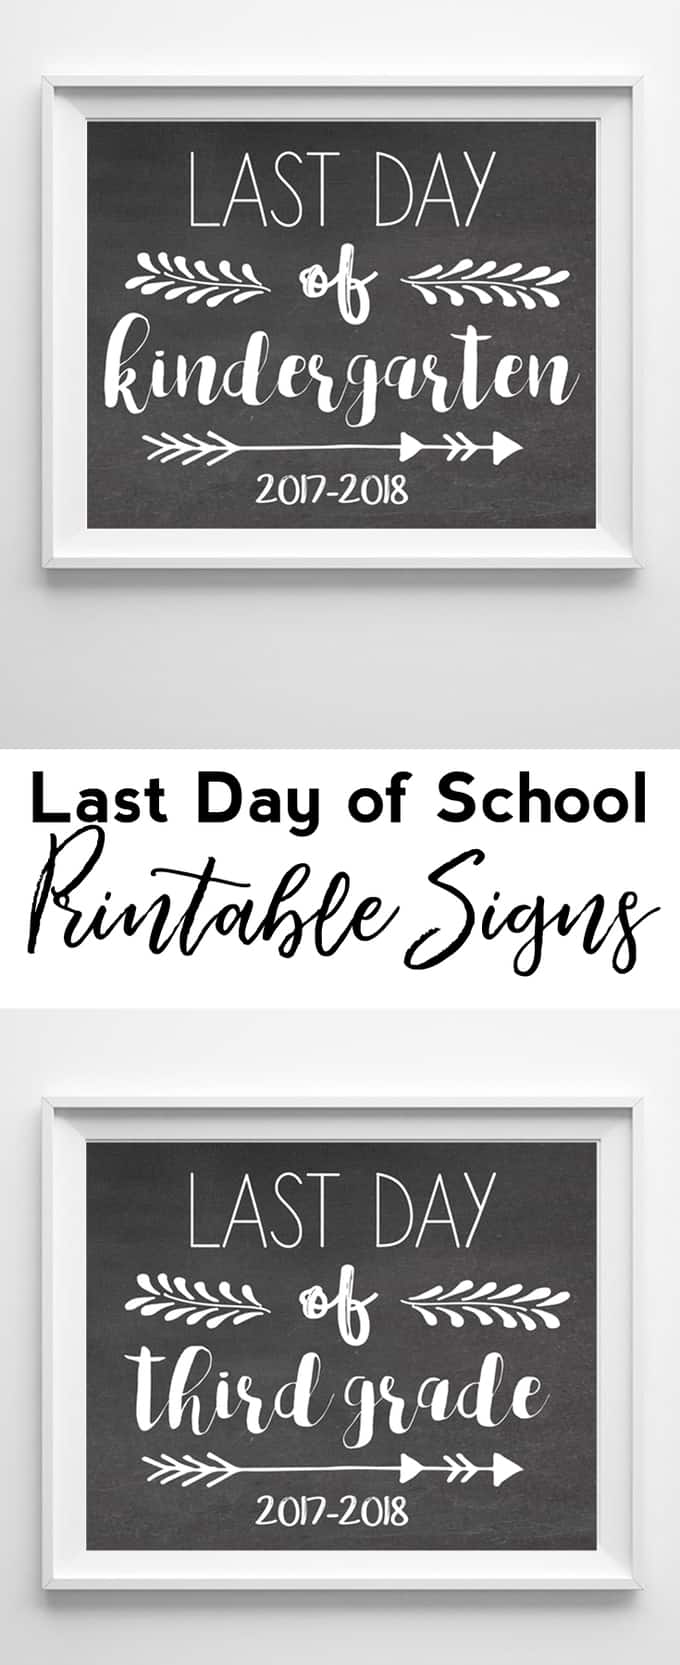 free-printable-last-day-of-school-signs-the-quiet-grove